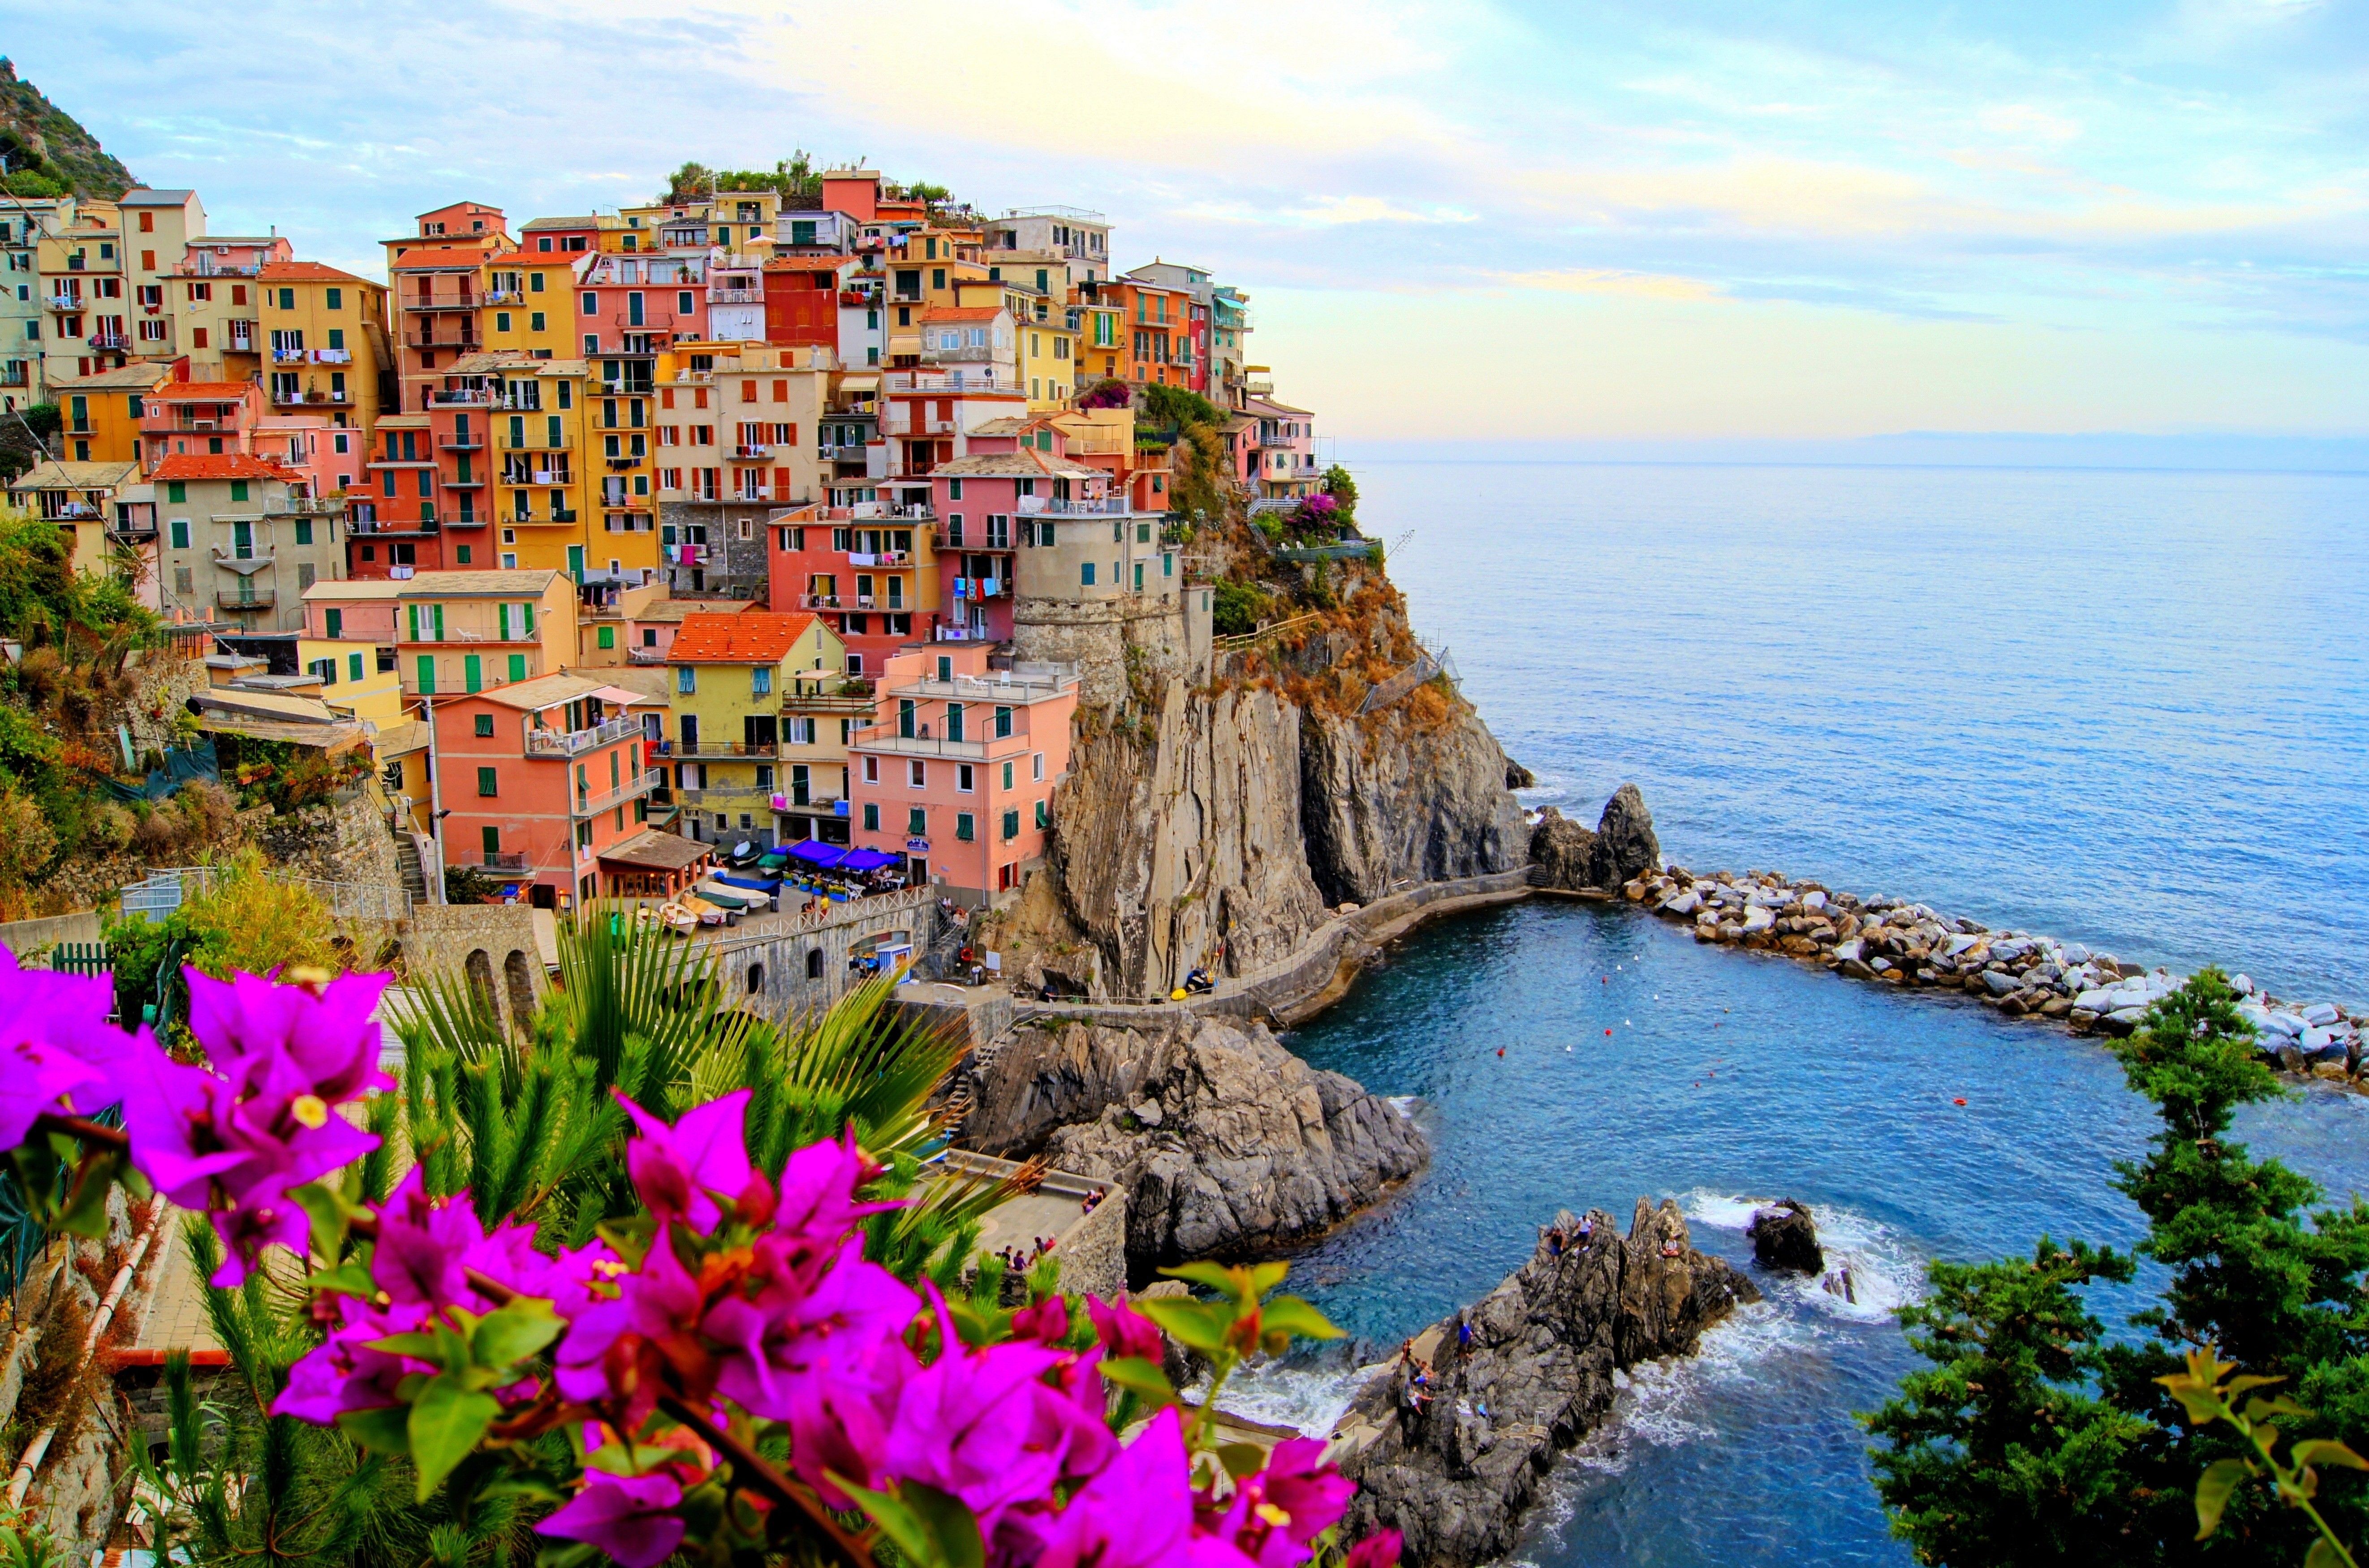 552 Italy Hd Wallpapers - High Resolution Cinque Terre - HD Wallpaper 